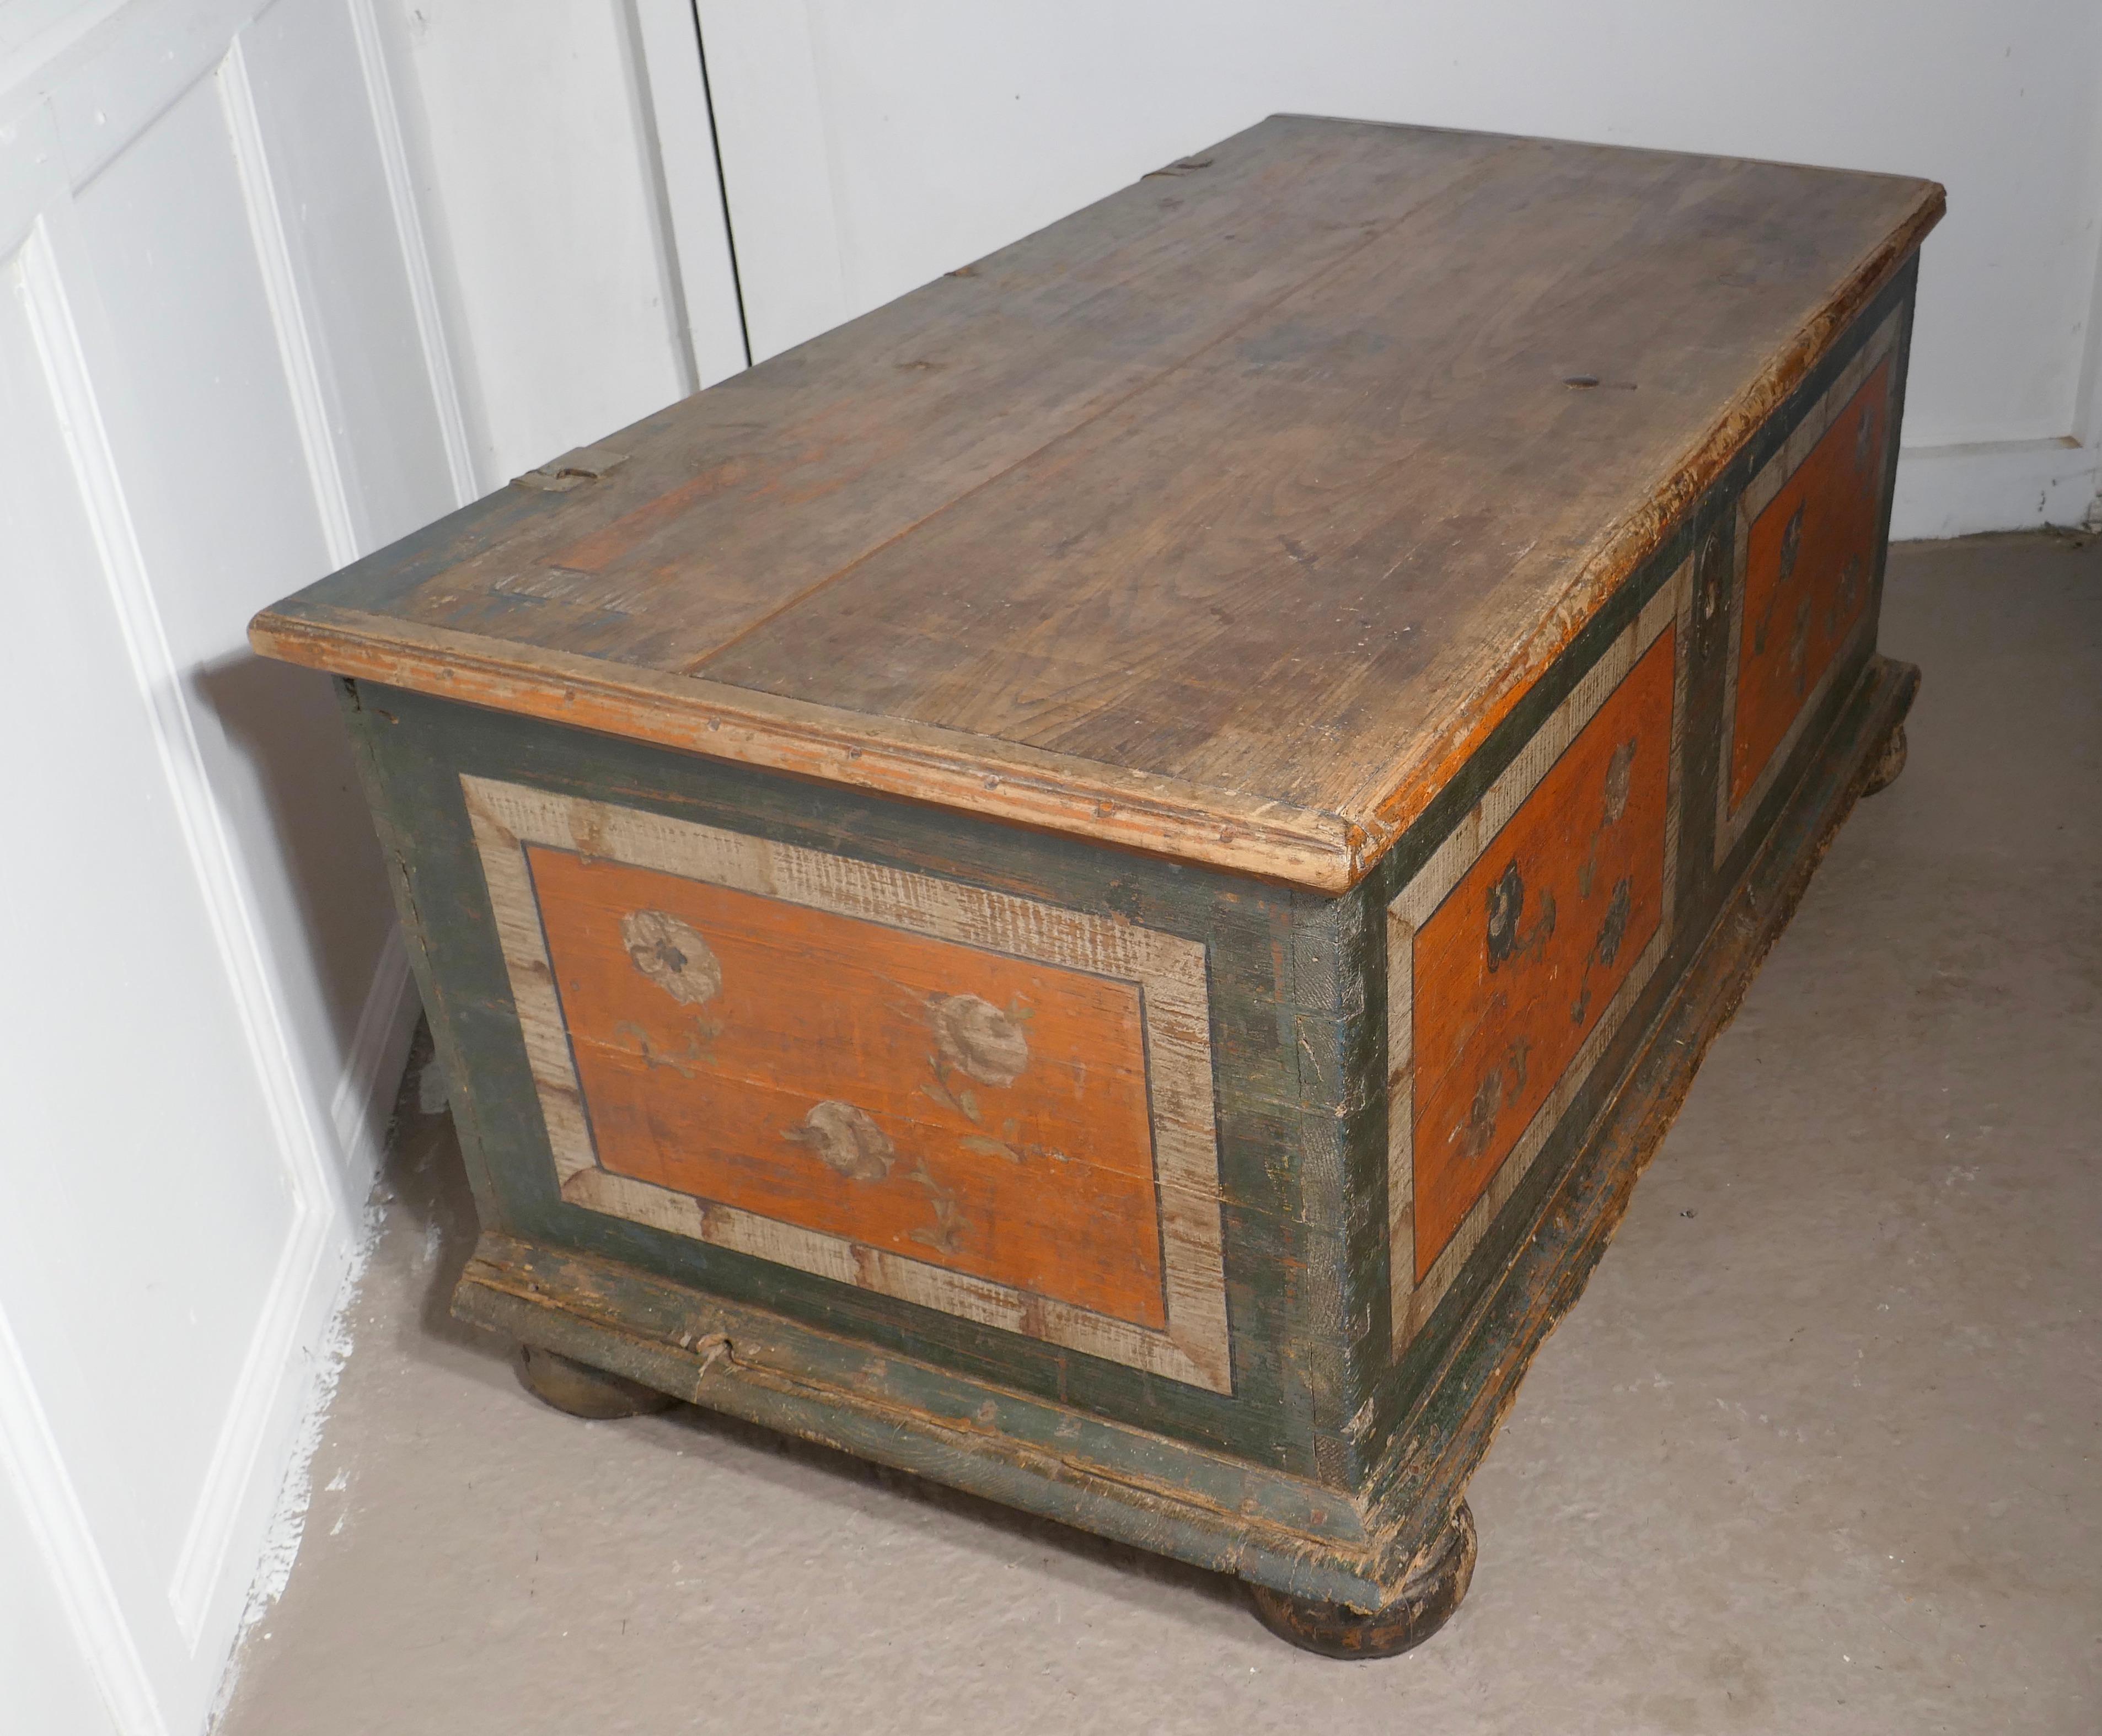 European Folk Art painted pine chest

This is a lovely piece, it has painted decoration, very visible on the front and sides though the decoration on the top has mostly worn away

The chest stands on big bun feet it has had a well used life
The